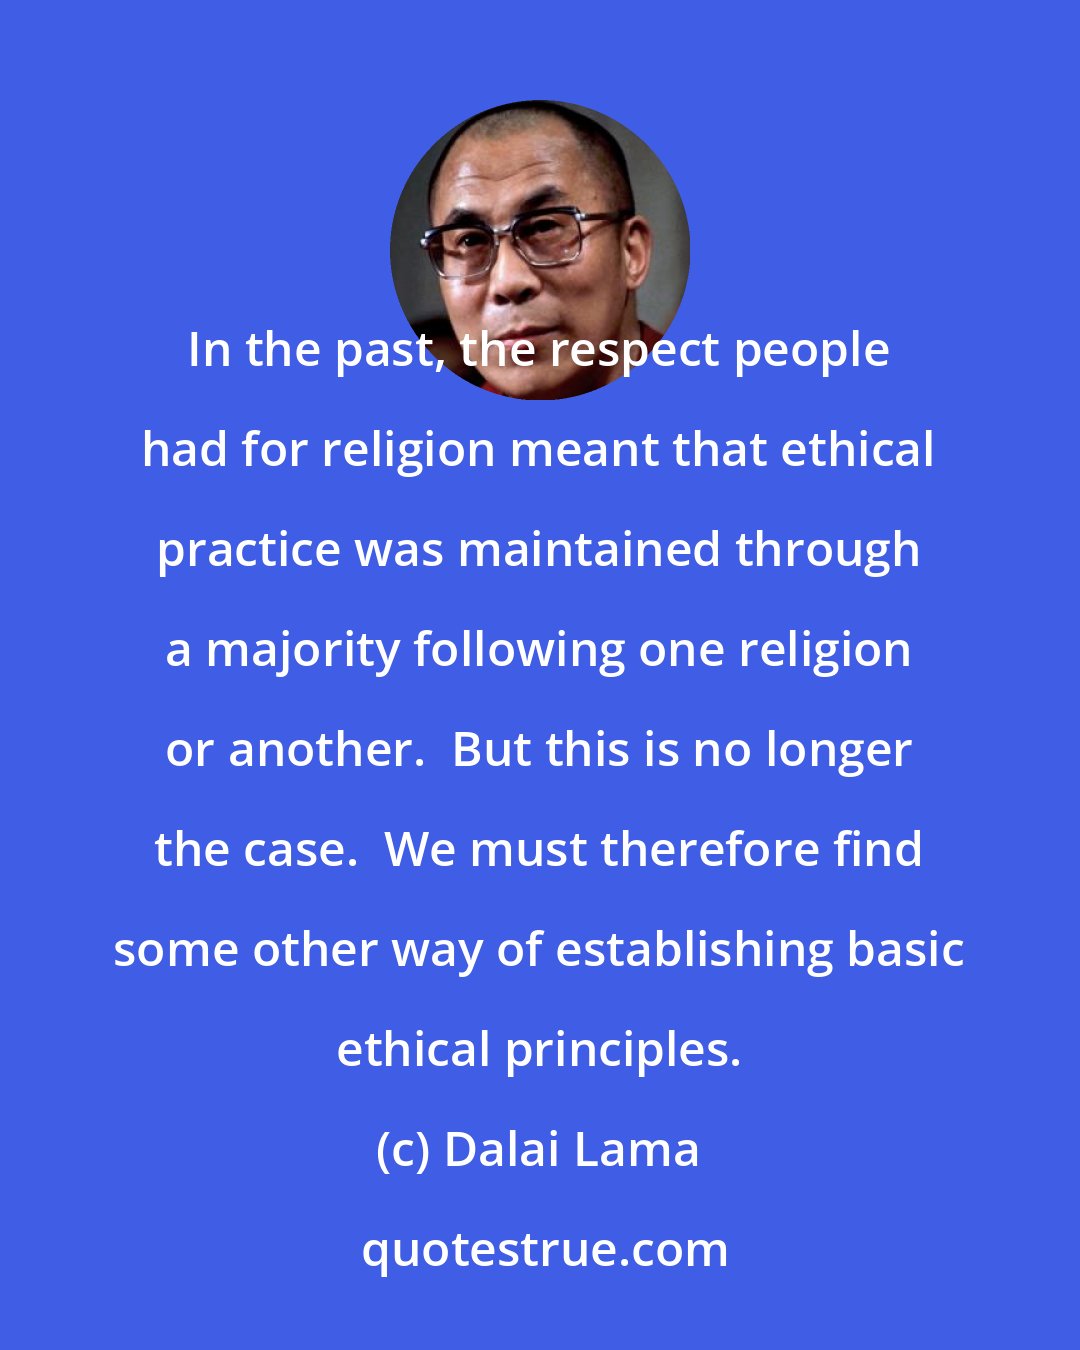 Dalai Lama: In the past, the respect people had for religion meant that ethical practice was maintained through a majority following one religion or another.  But this is no longer the case.  We must therefore find some other way of establishing basic ethical principles.